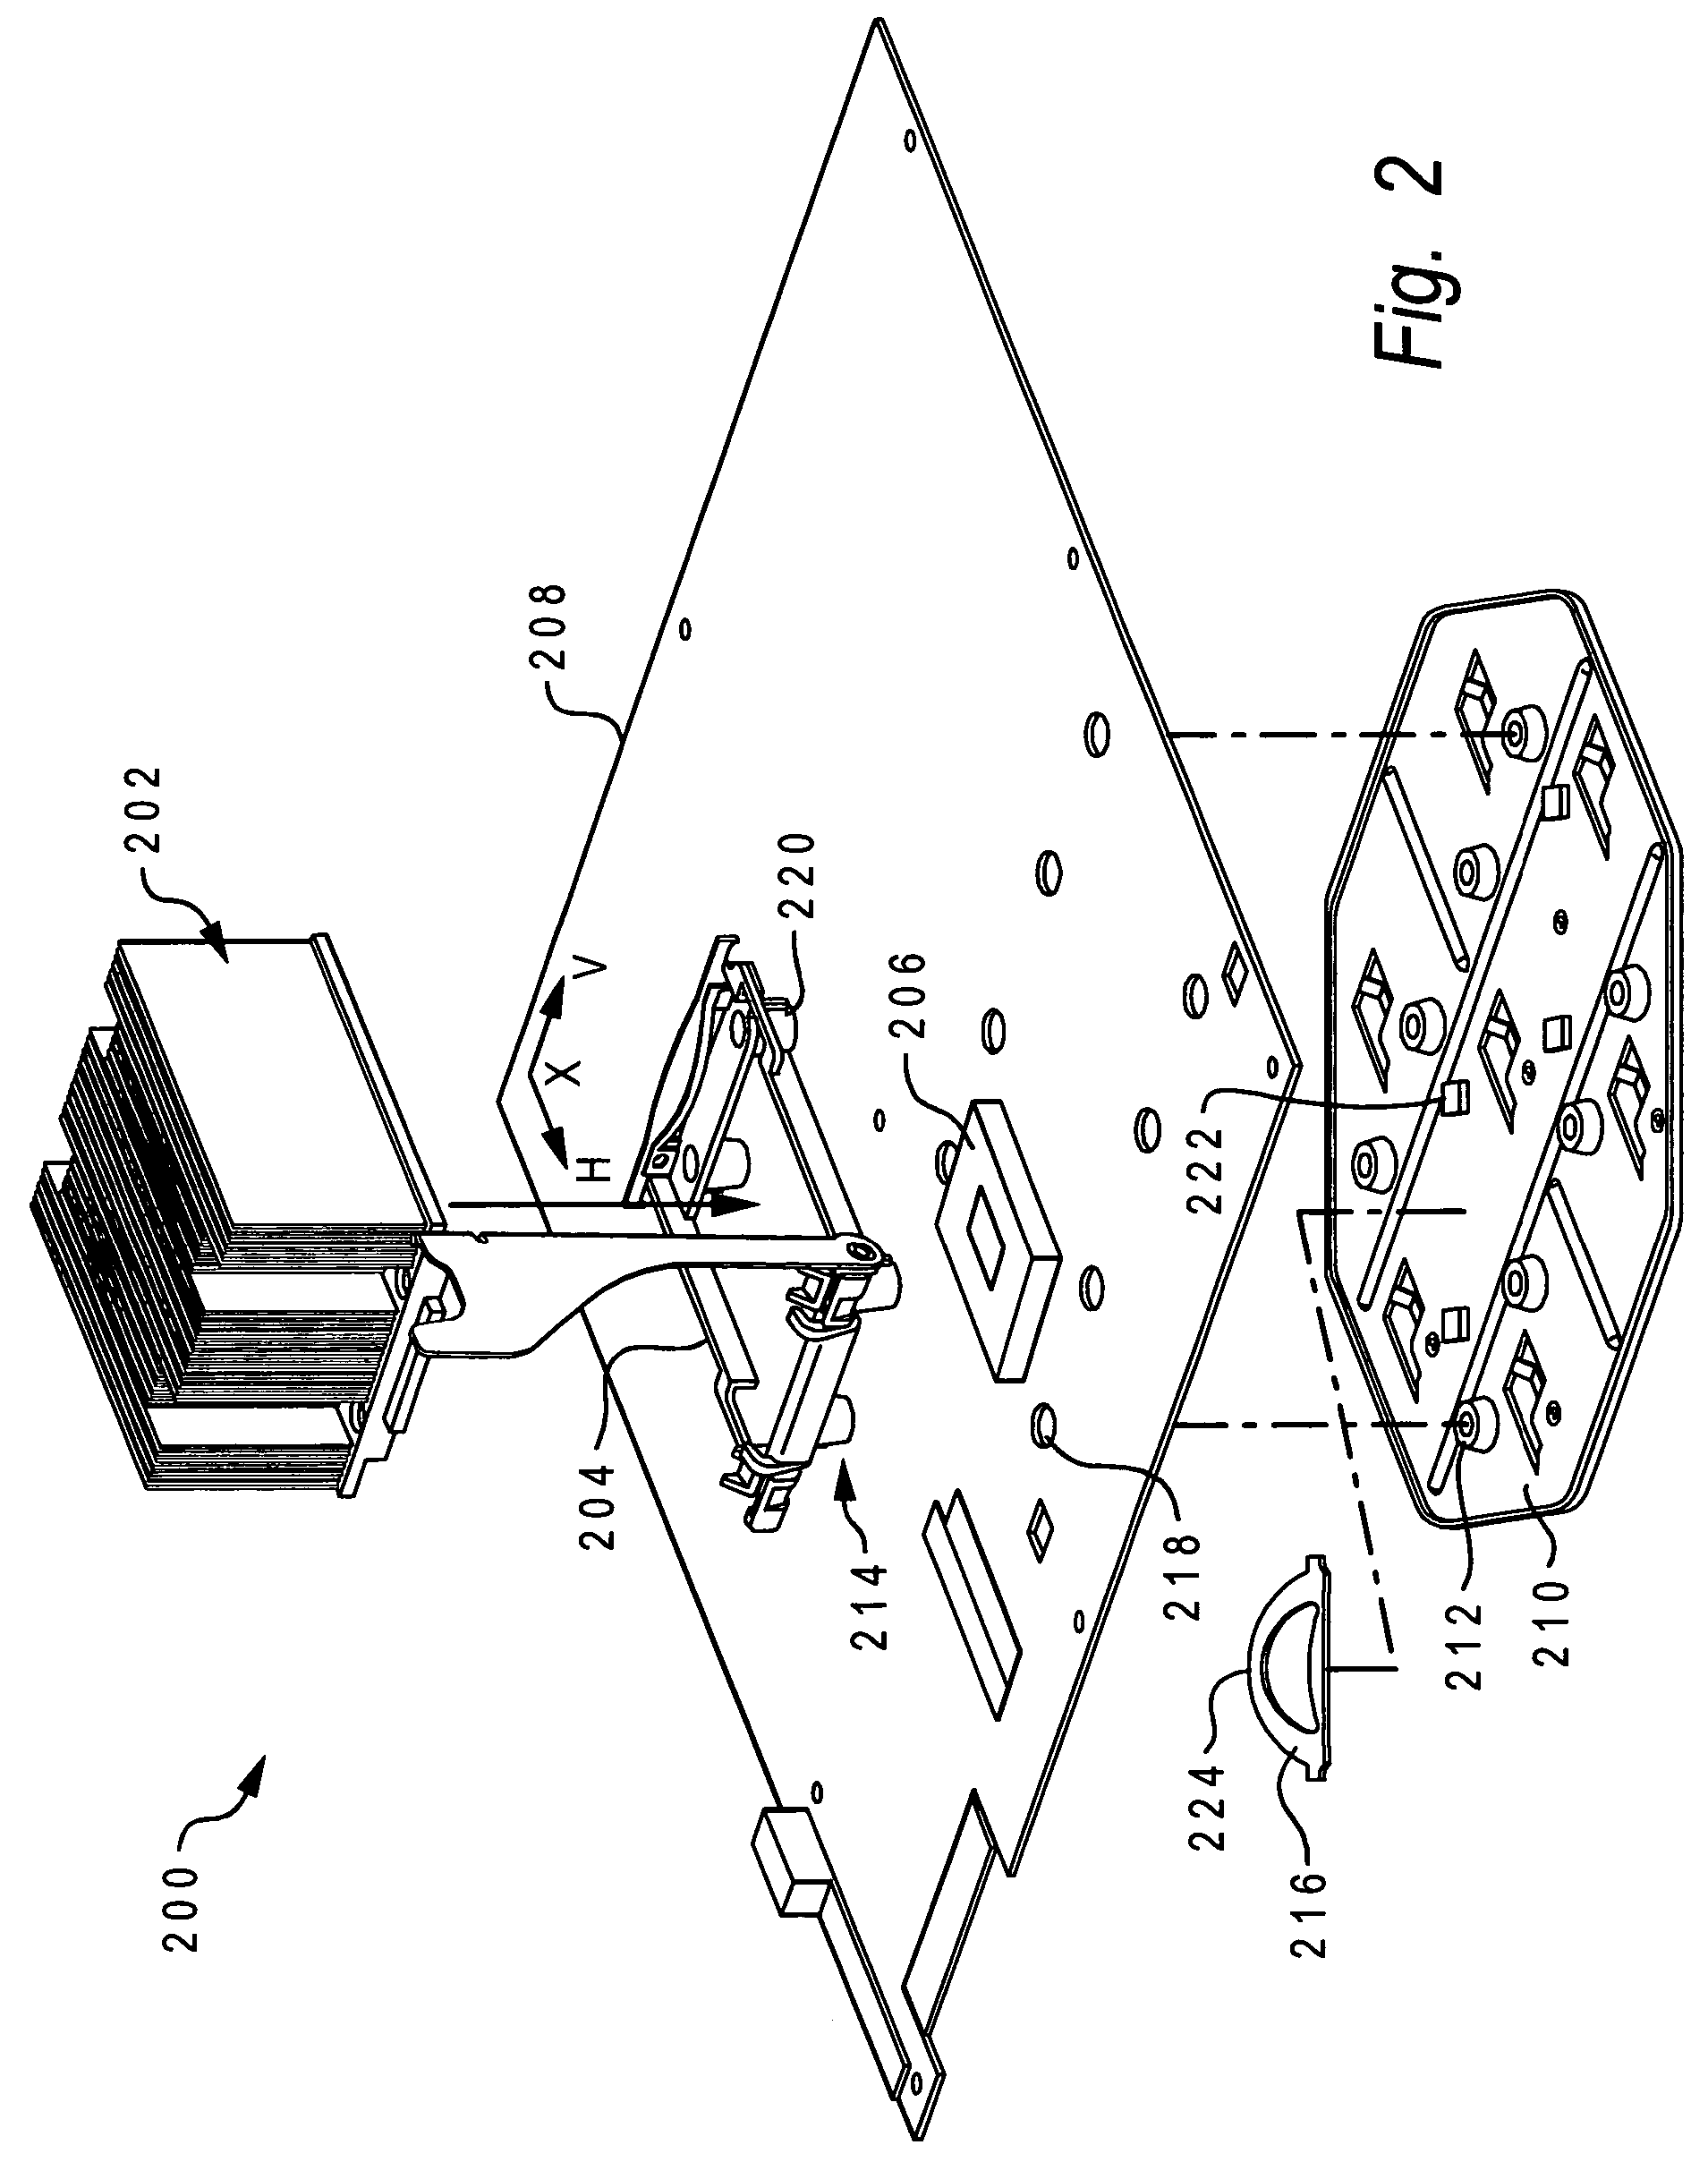 Heat sink and chip sandwich system